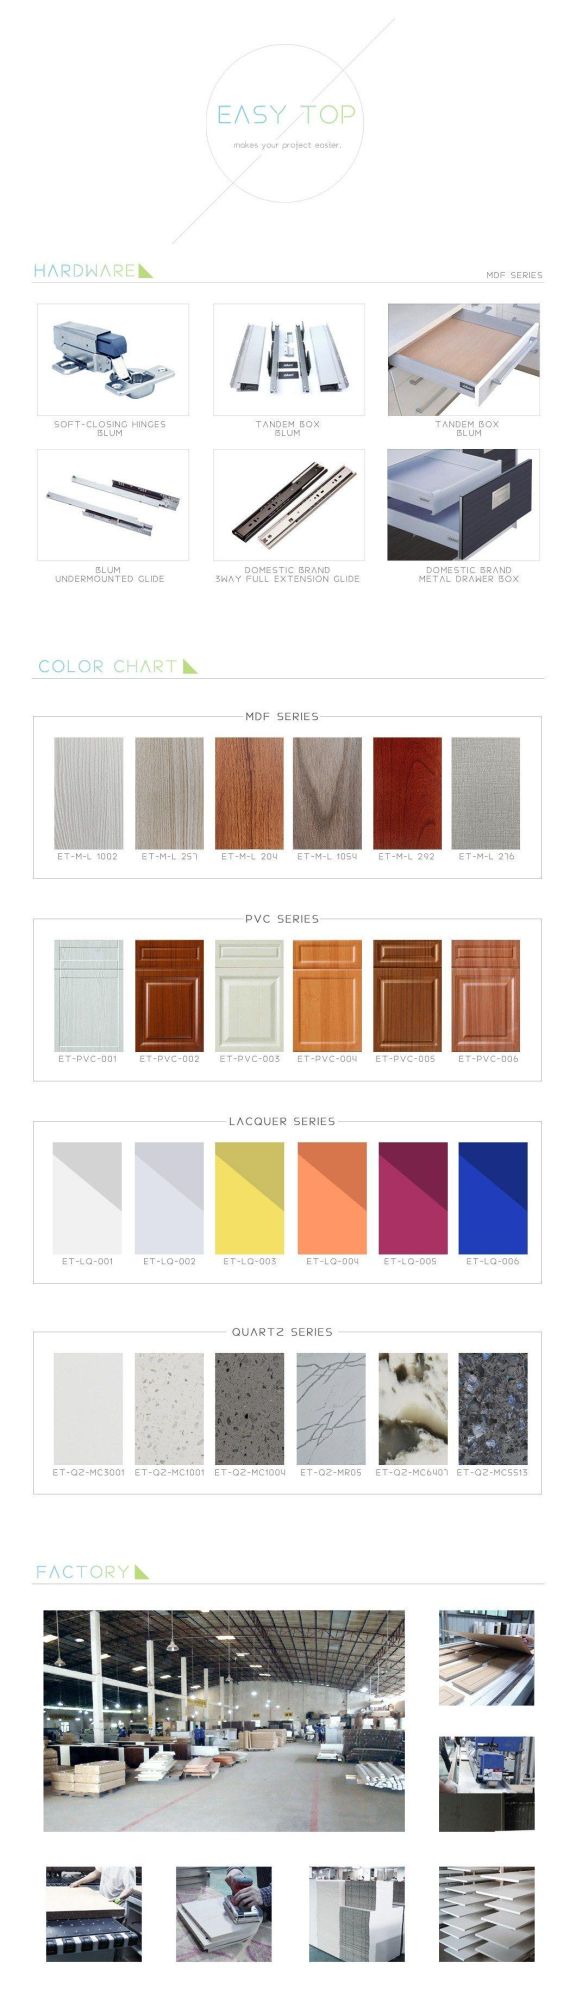 Wholesale Factory Price Custom Designs White and Brown Wooden Furniture Lacquer Kitchen Cabinet